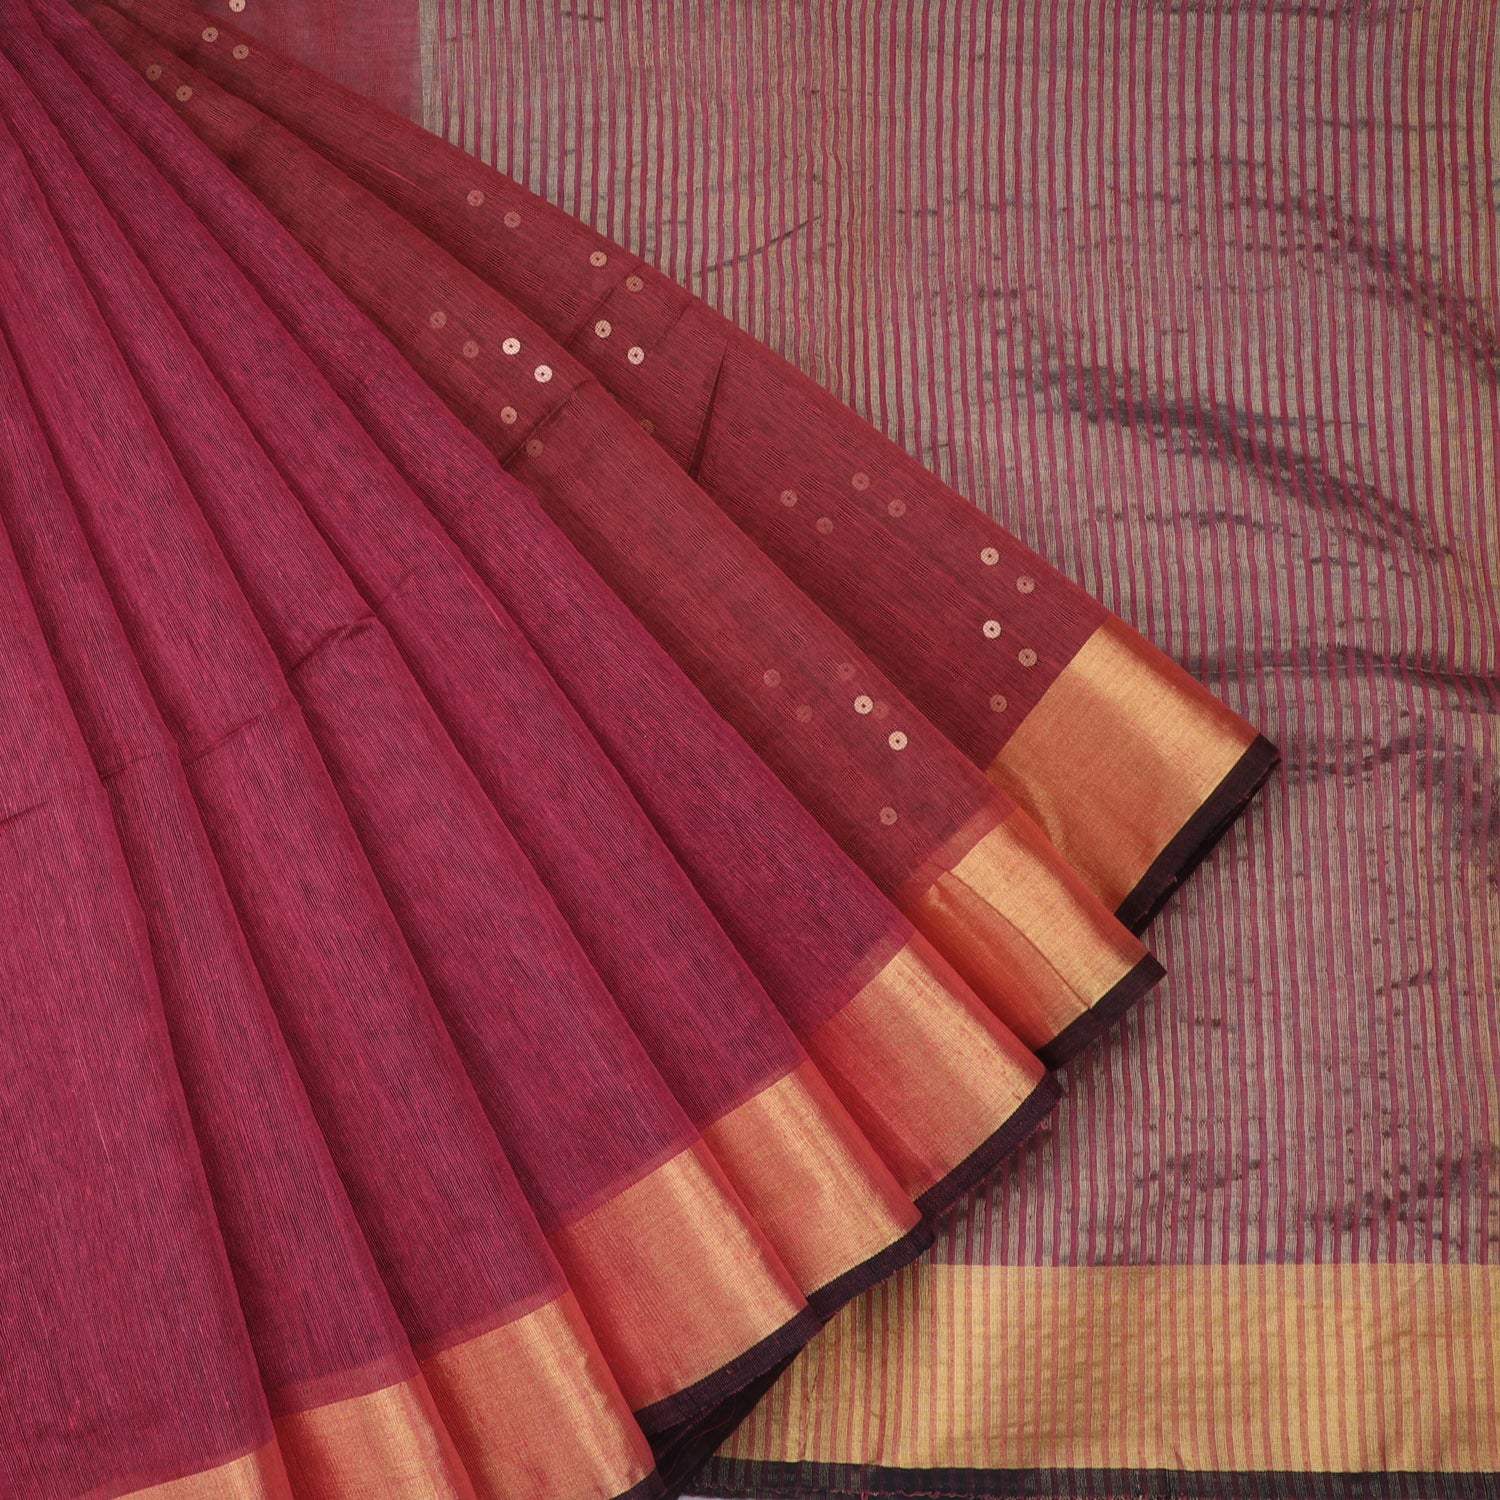 Plum Brown Matka Silk Saree With Sequin Embroidery - Singhania's